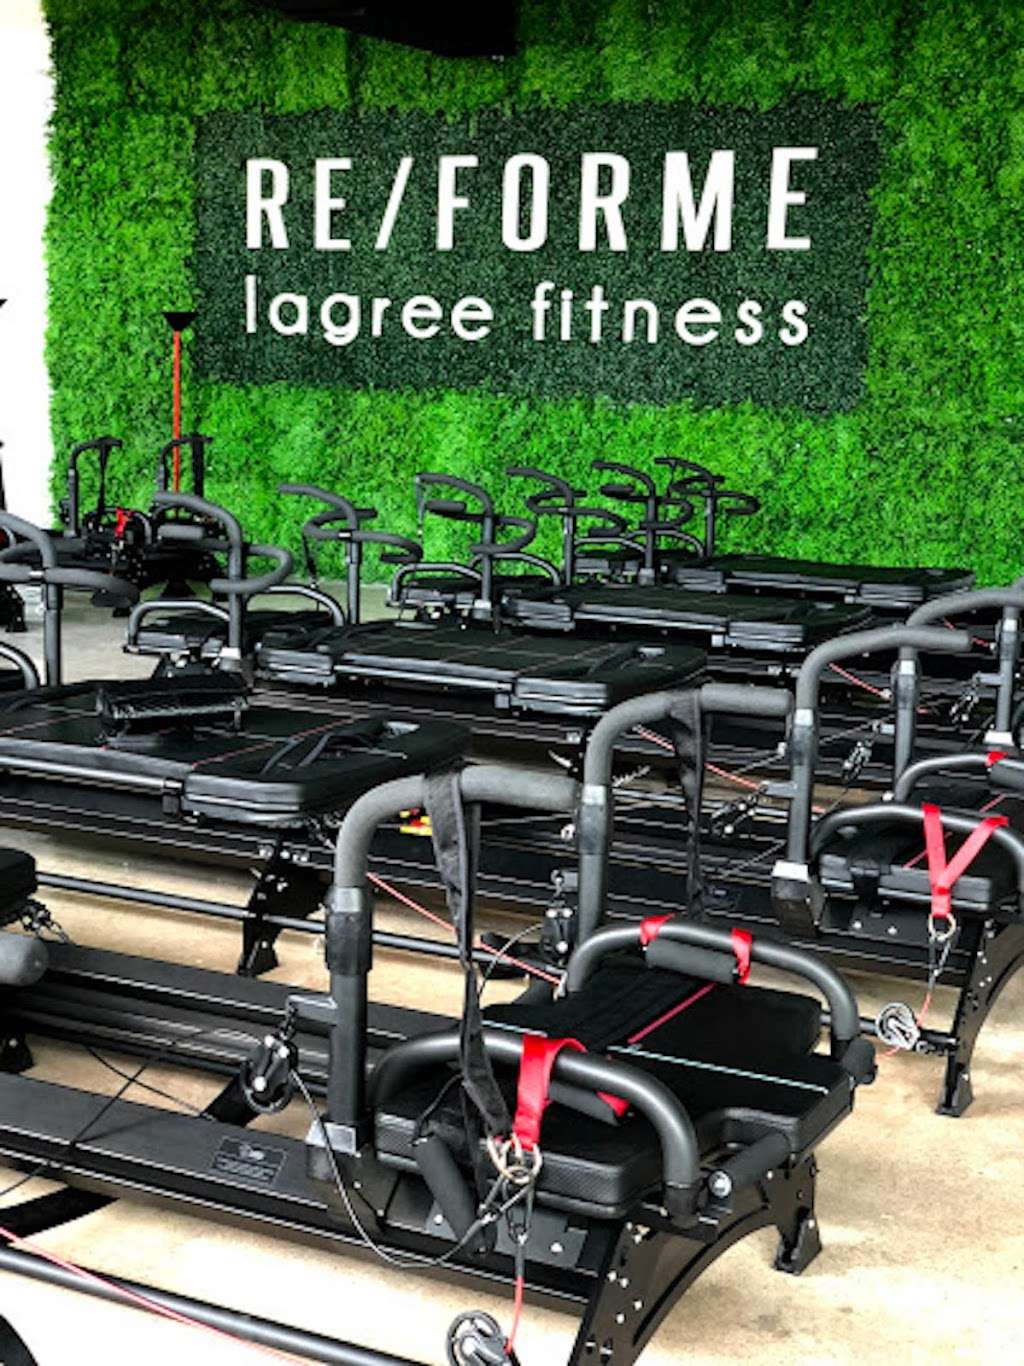 Re/forme lagree fitness | 1737 W 34th St #800, Houston, TX 77018 | Phone: (832) 516-0061